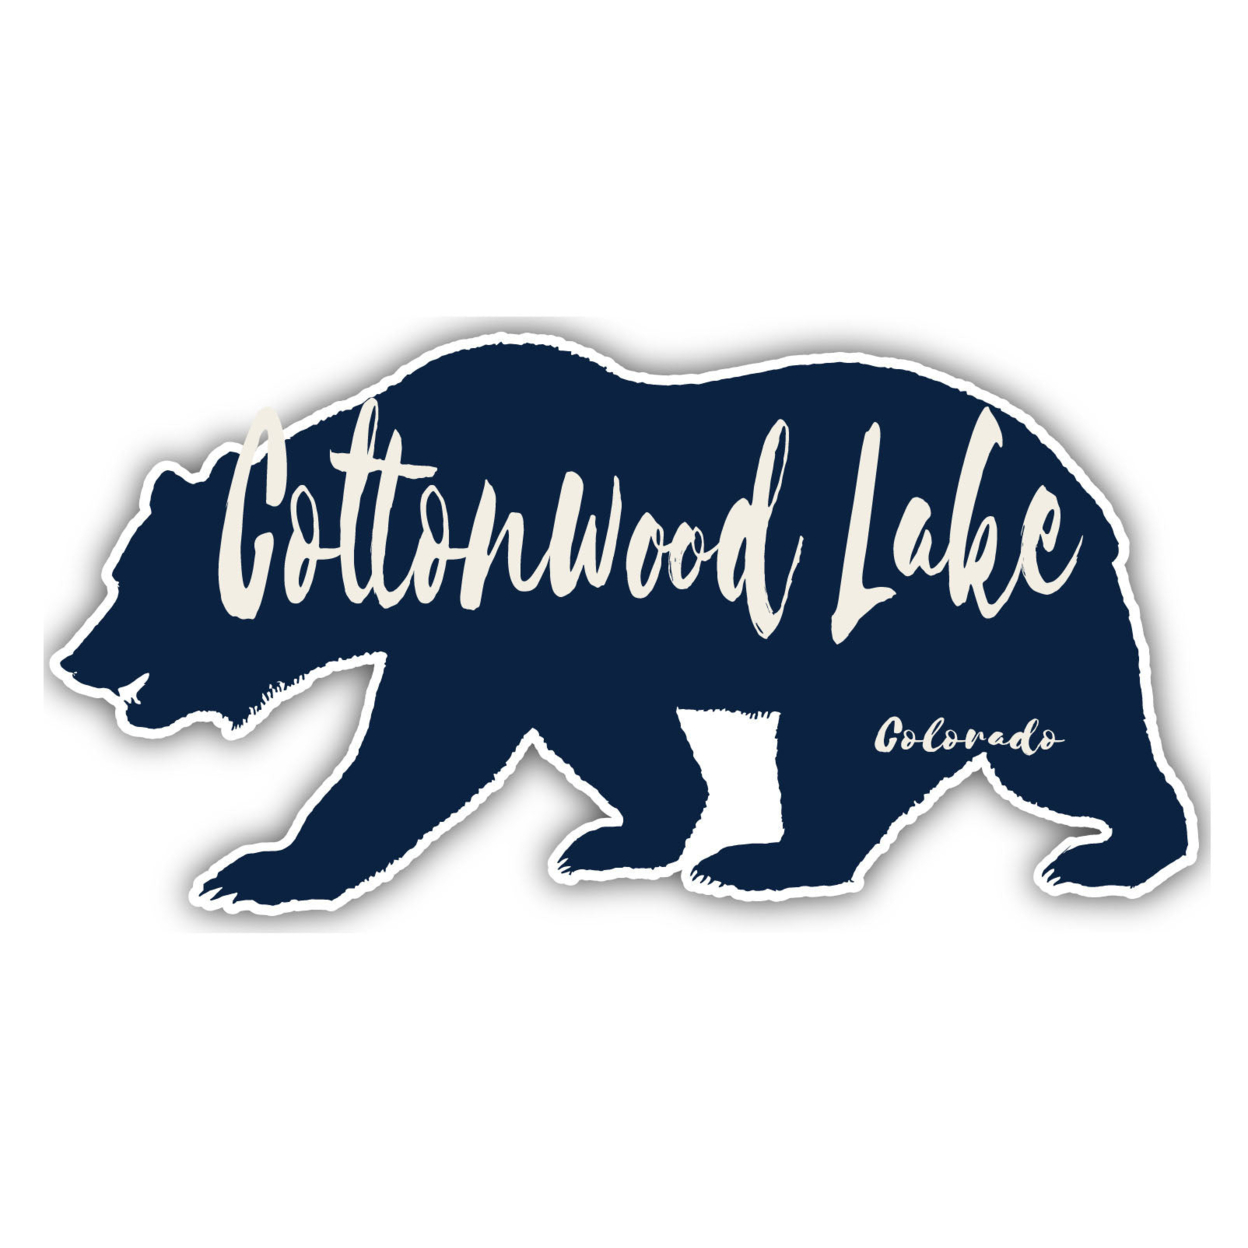 Cottonwood Lake Colorado Souvenir Decorative Stickers (Choose Theme And Size) - 4-Pack, 10-Inch, Tent